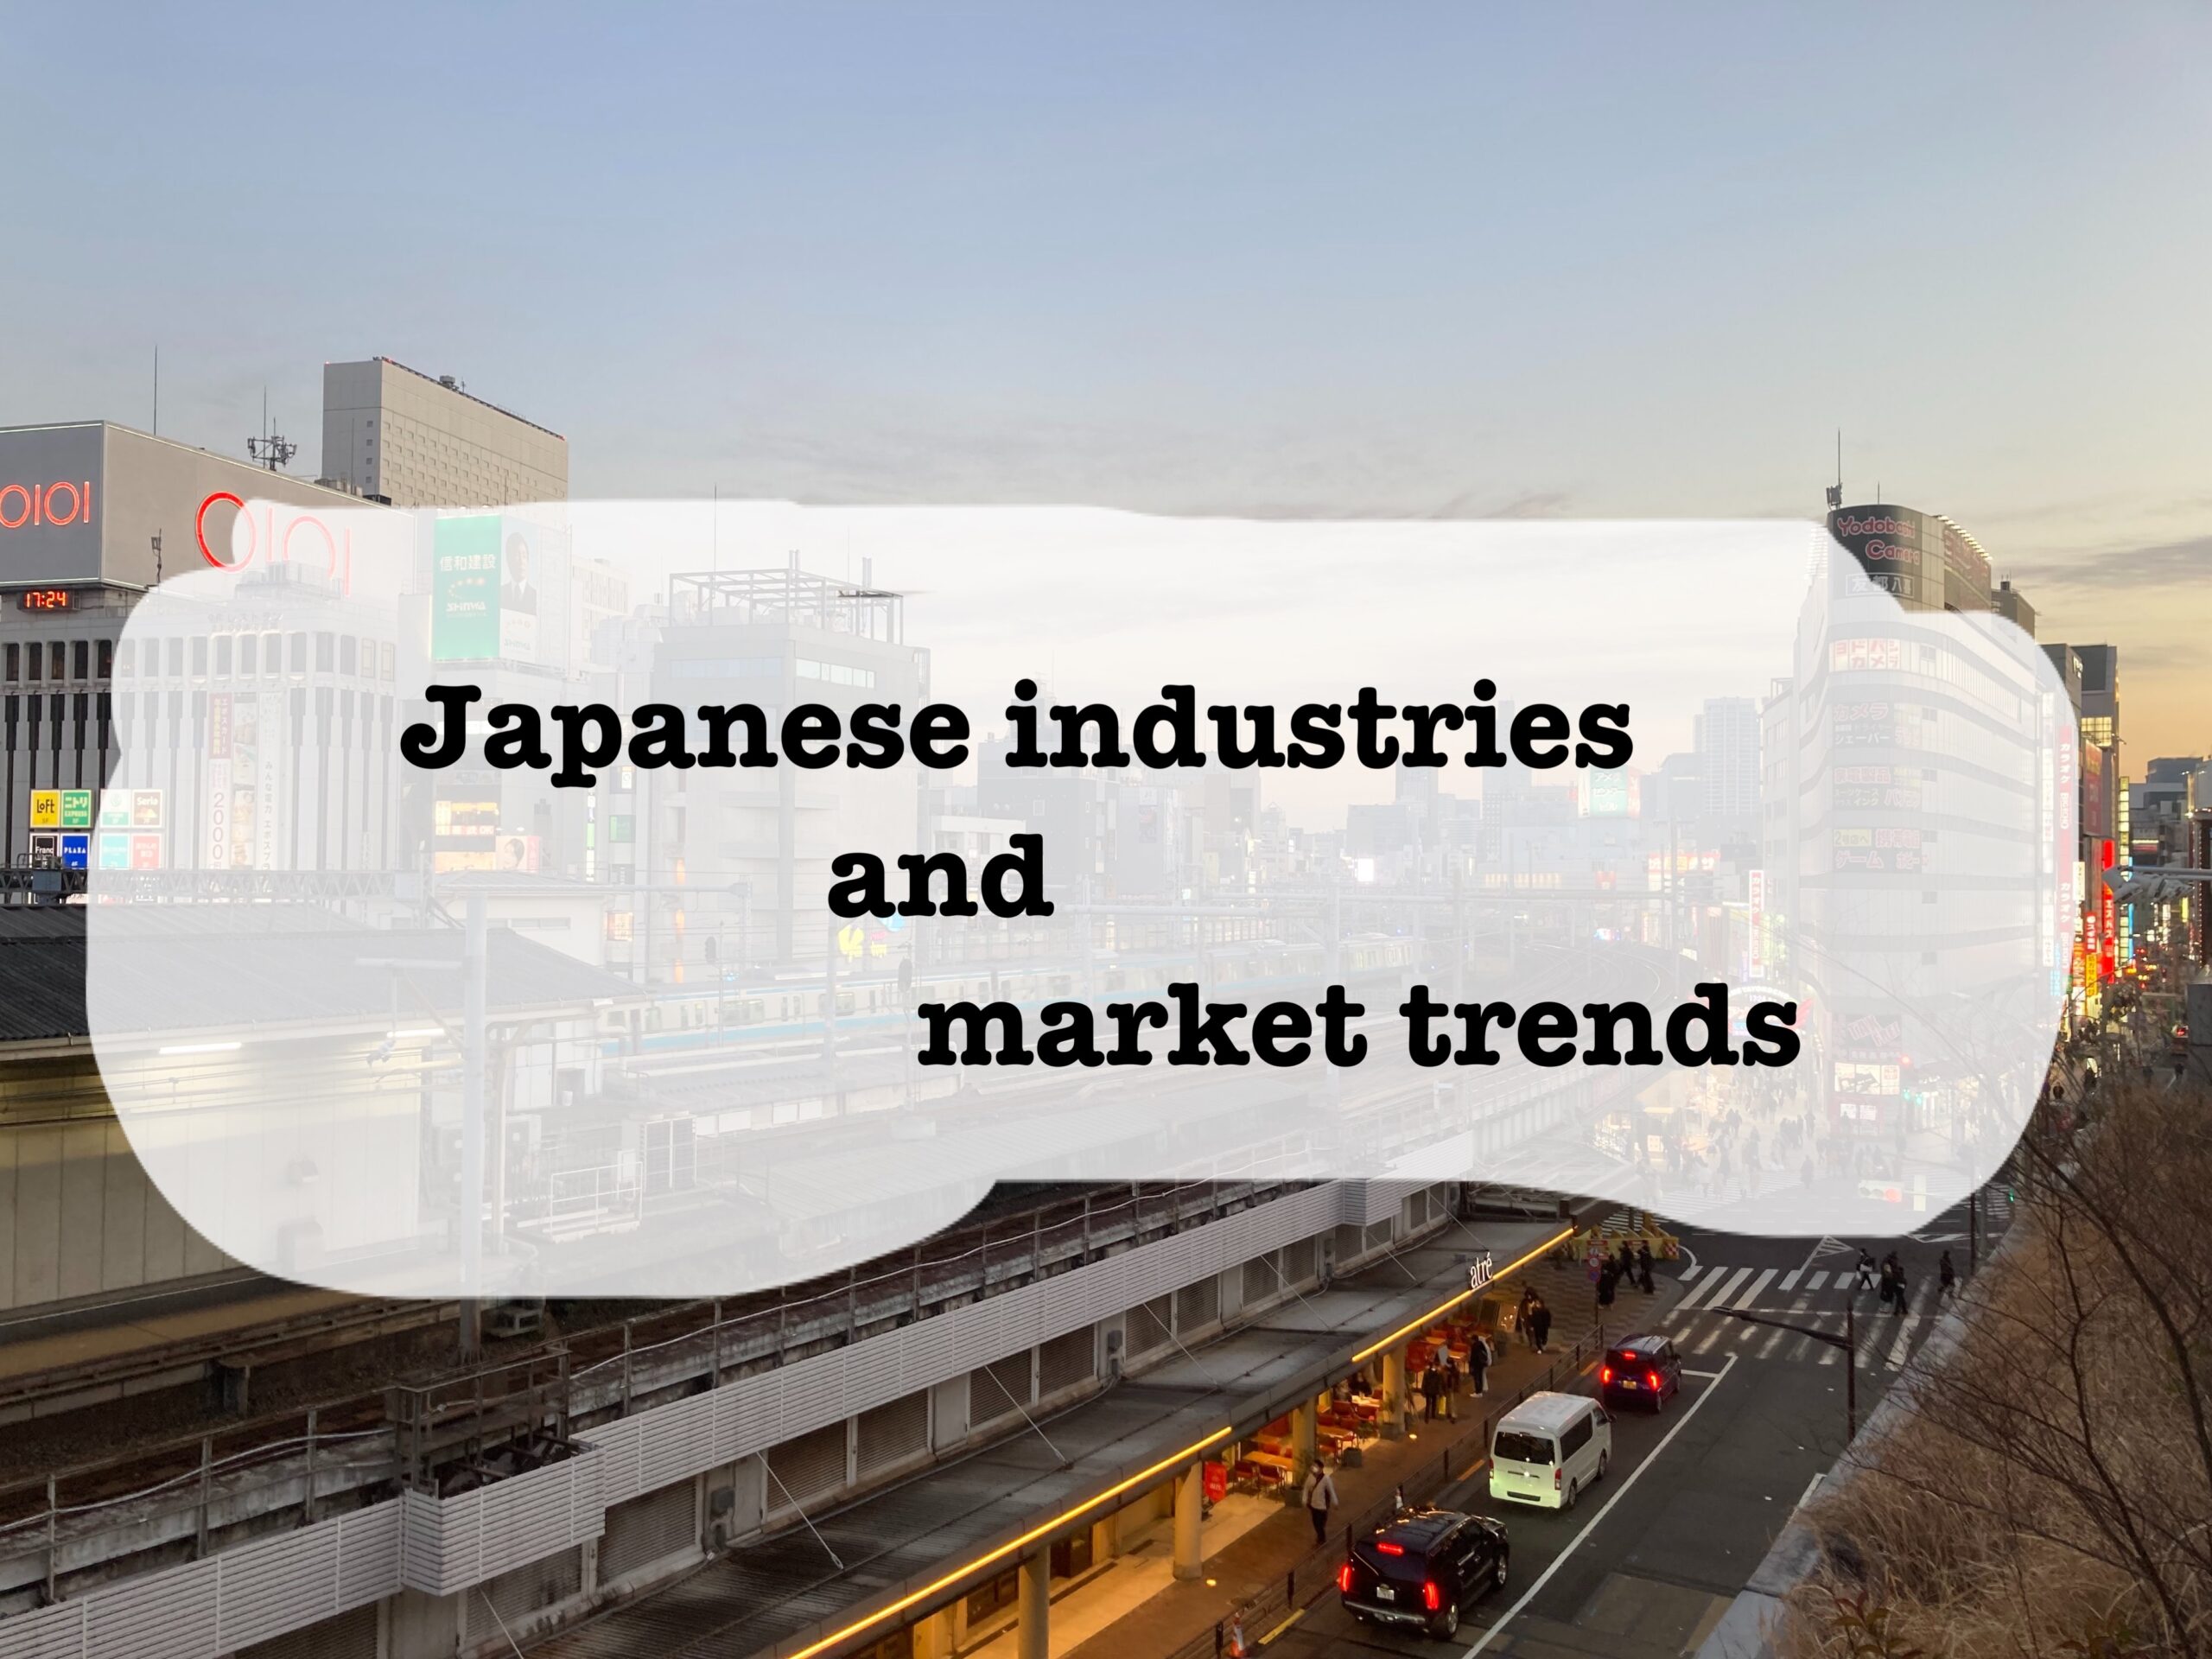 Jananese industries and market trends